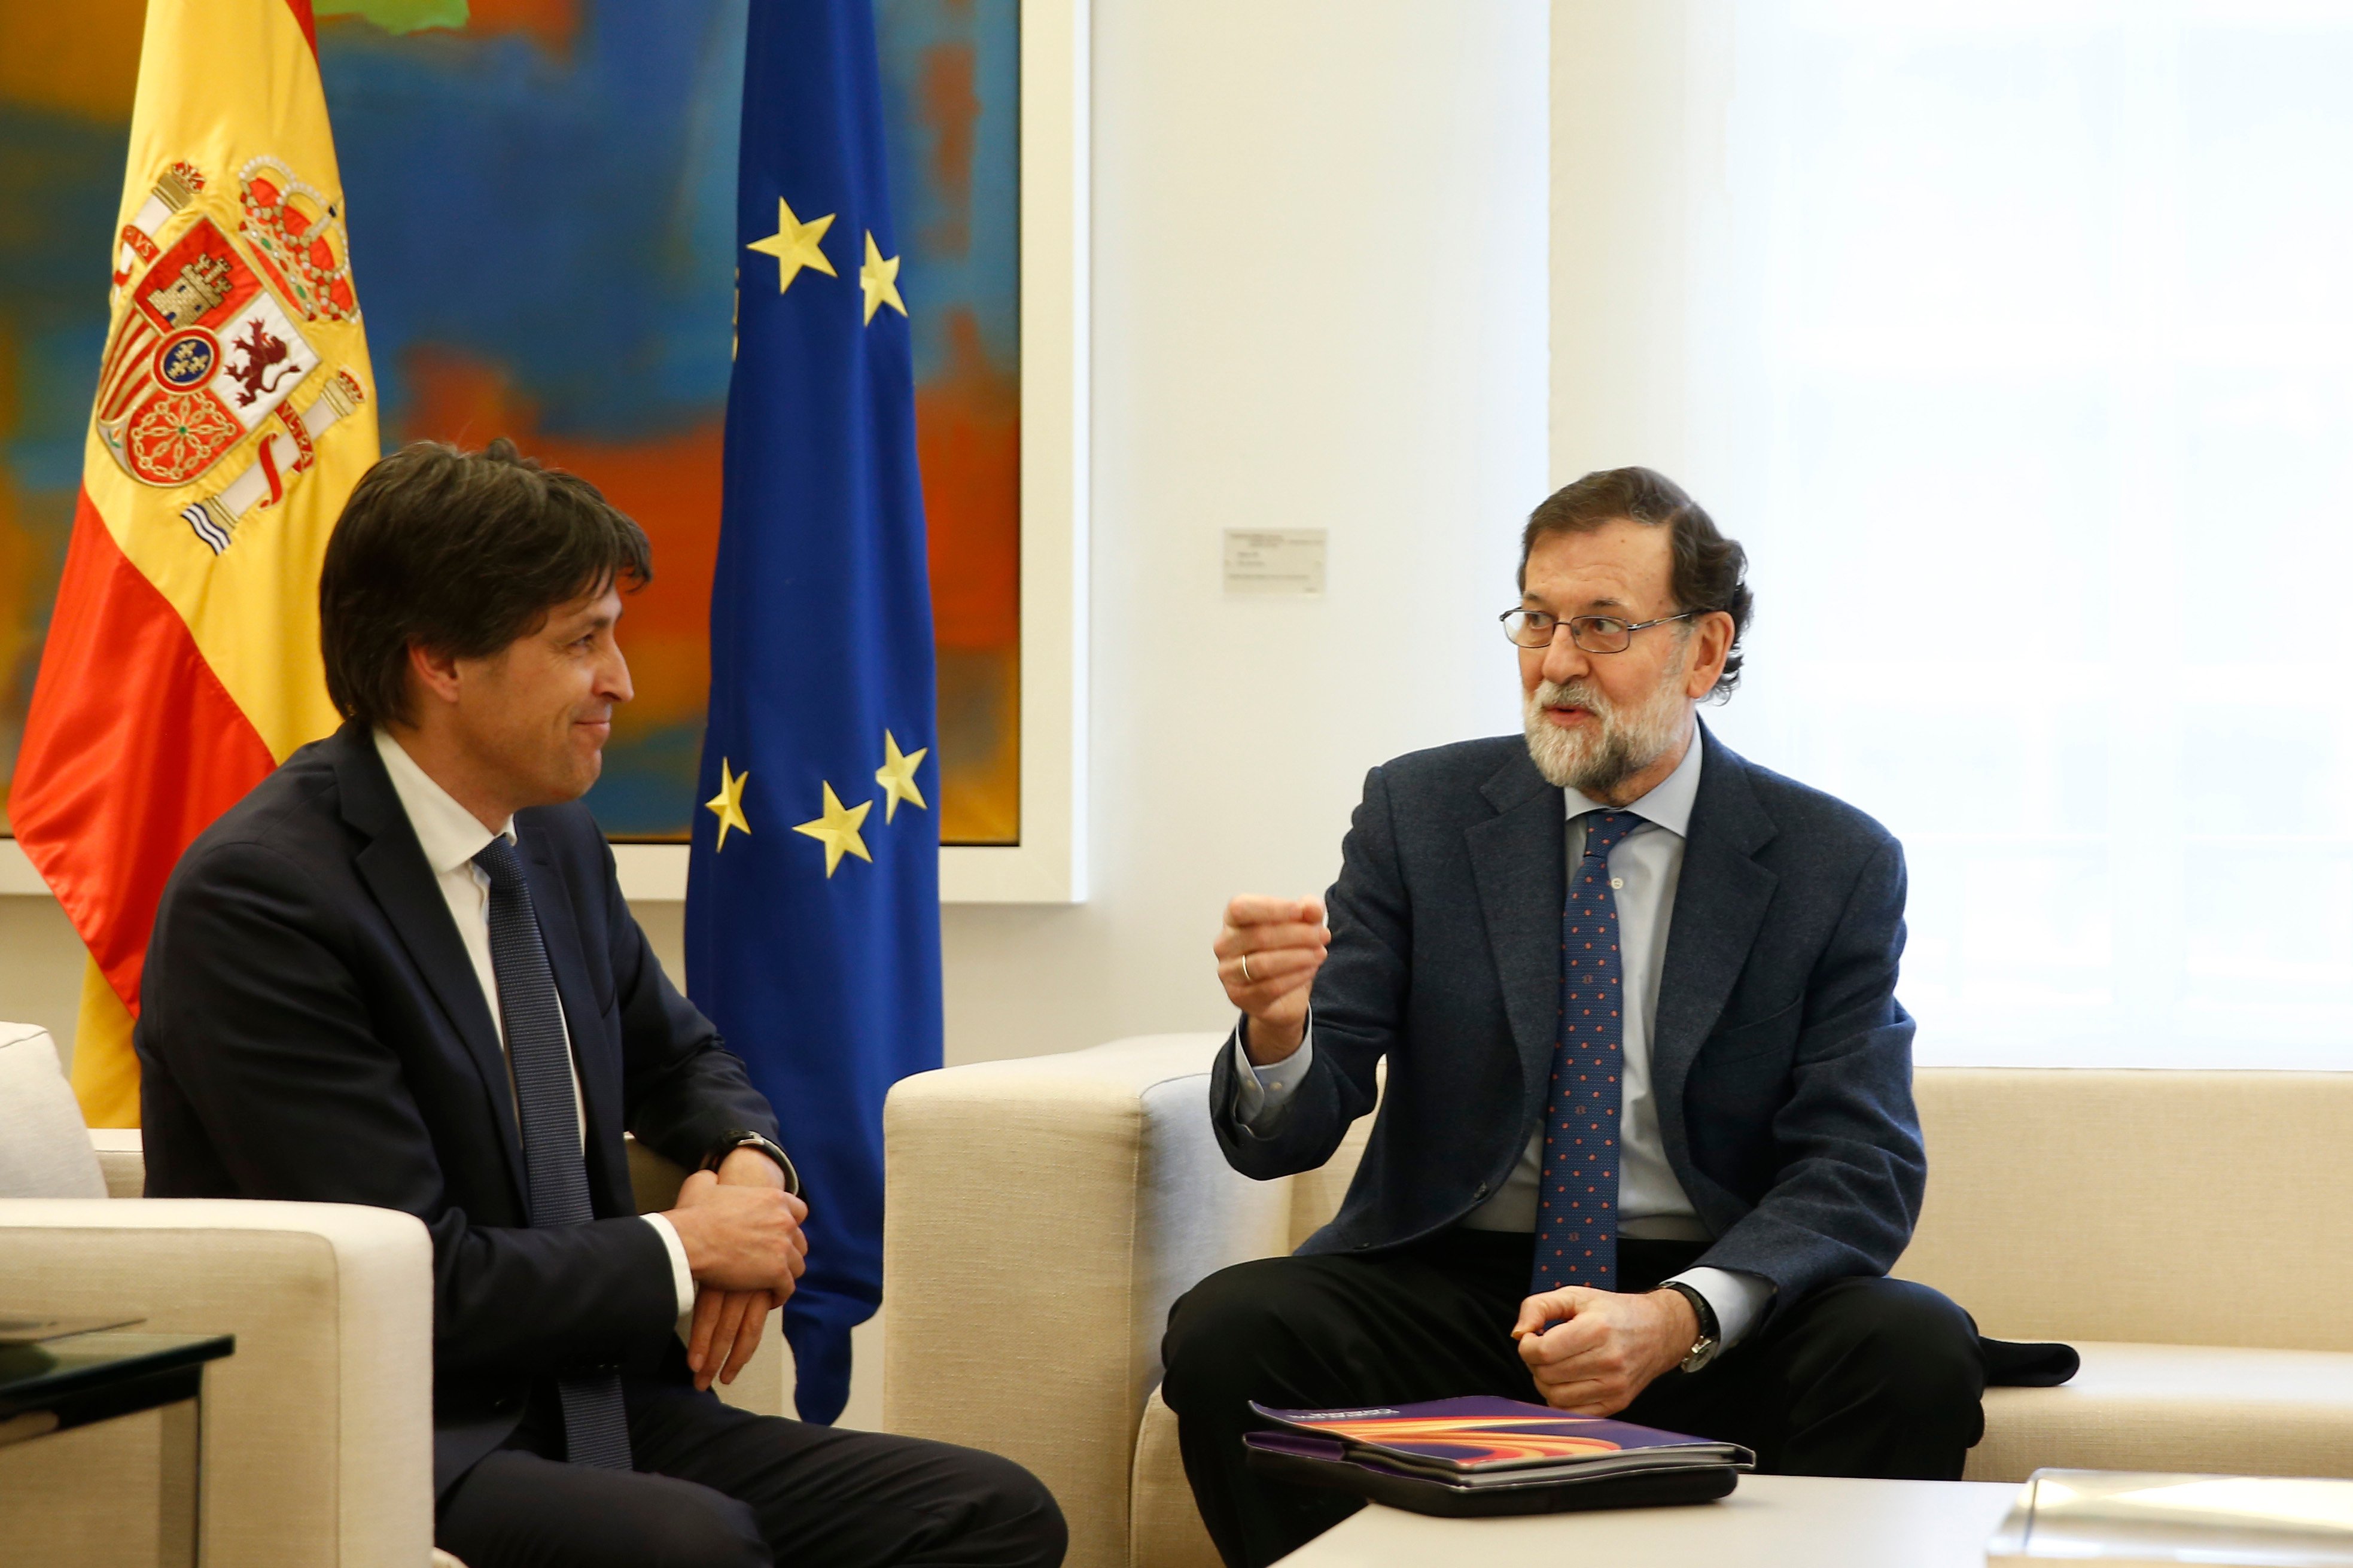 Rajoy aims to use intervention to make Spanish the working language in schools